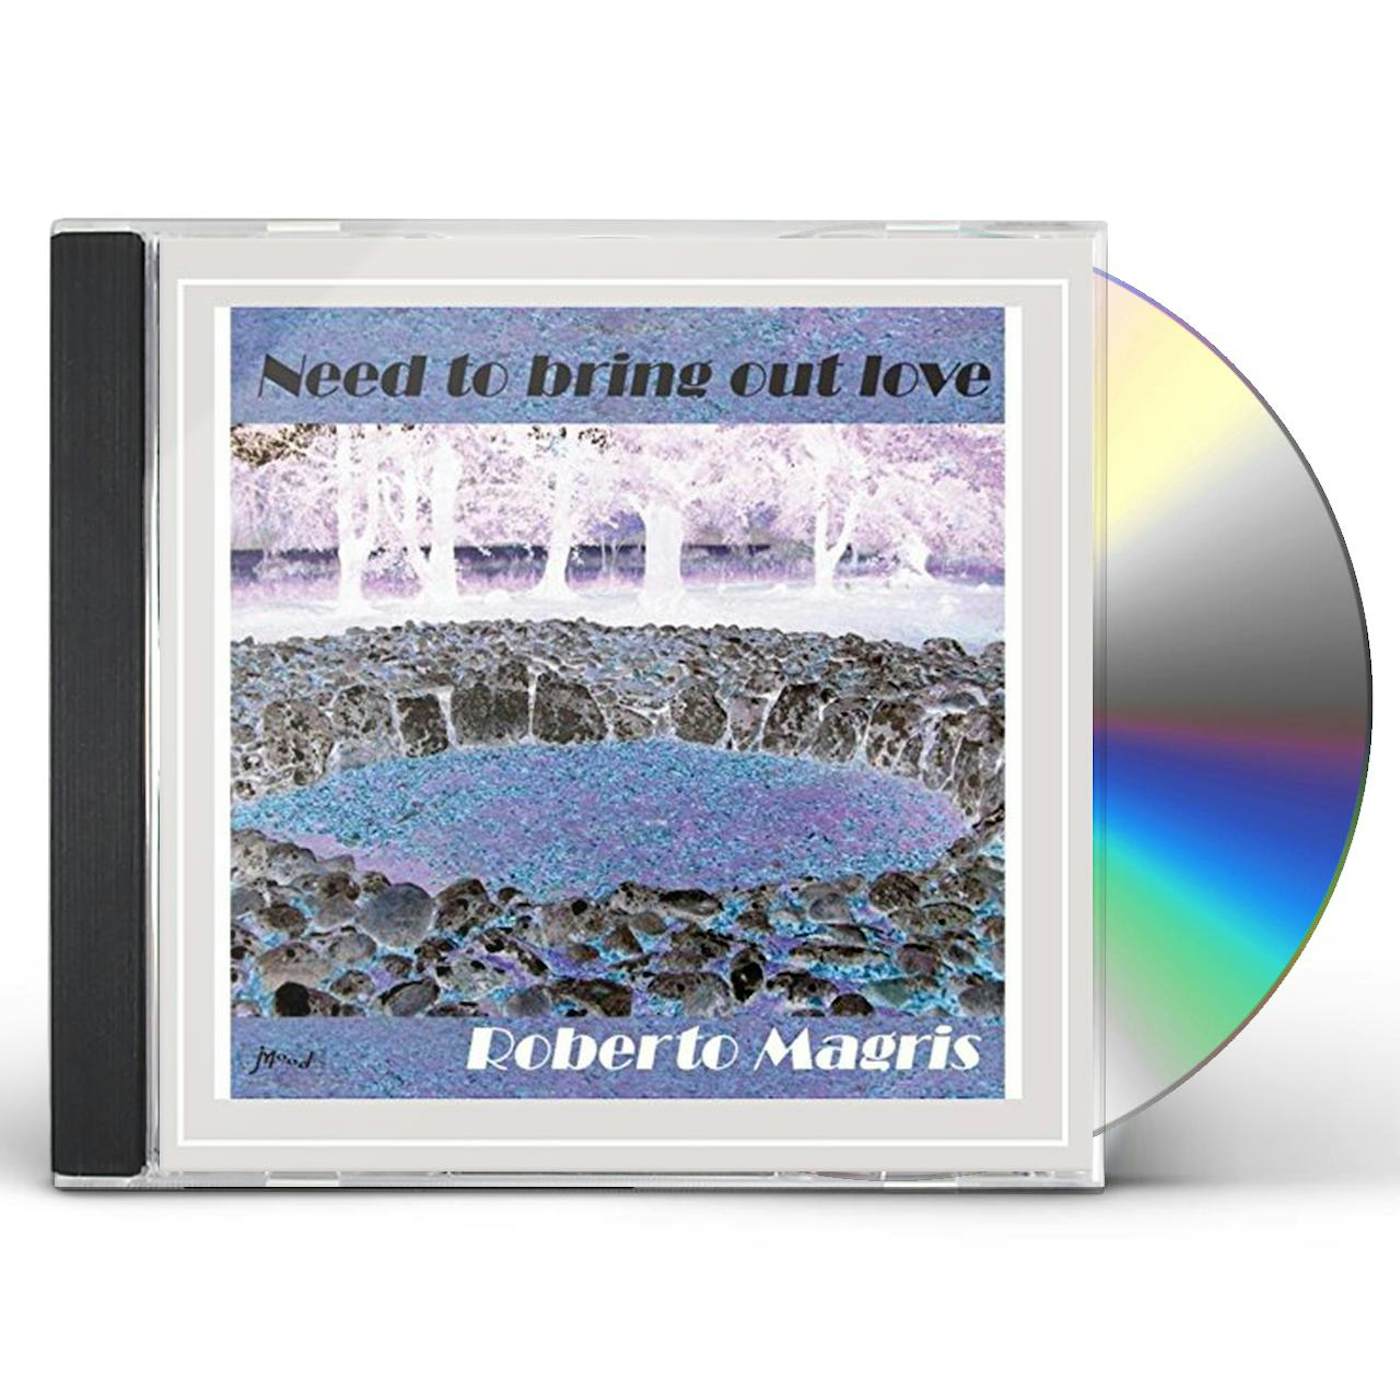 Roberto Magris NEED TO BRING OUT LOVE CD